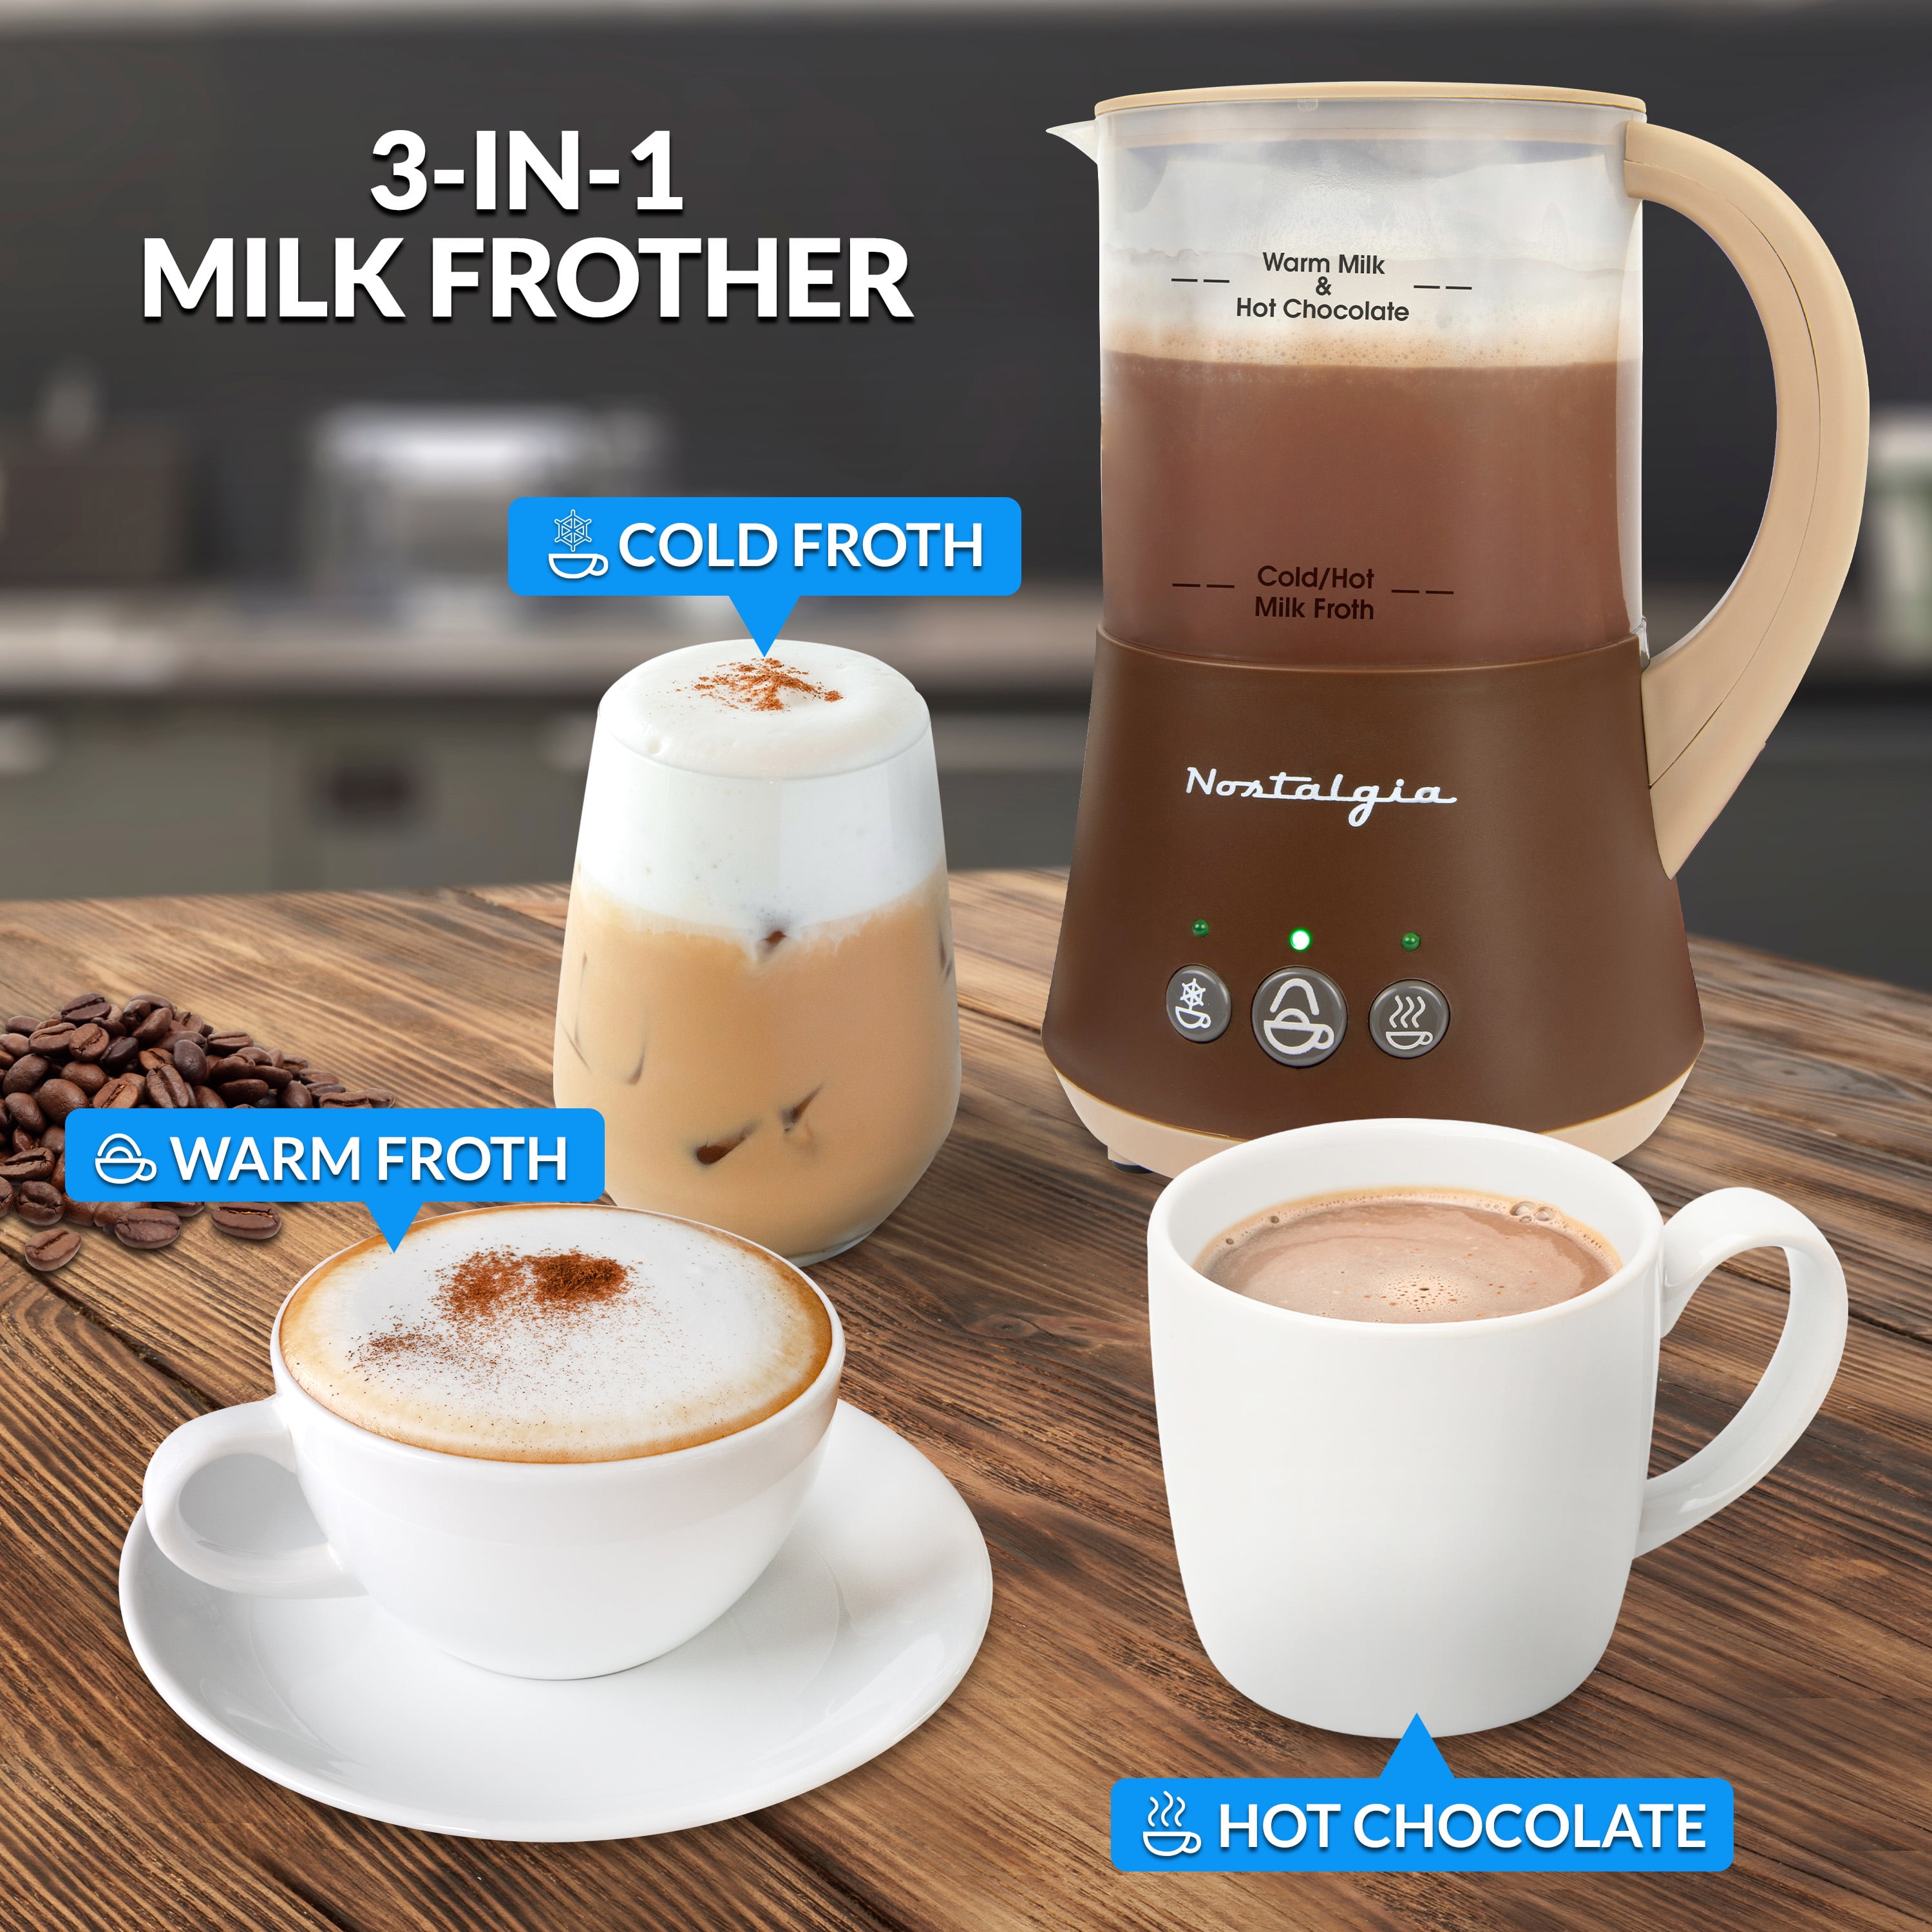 Nostalgia Hot Chocolate Automatic Milk Frother